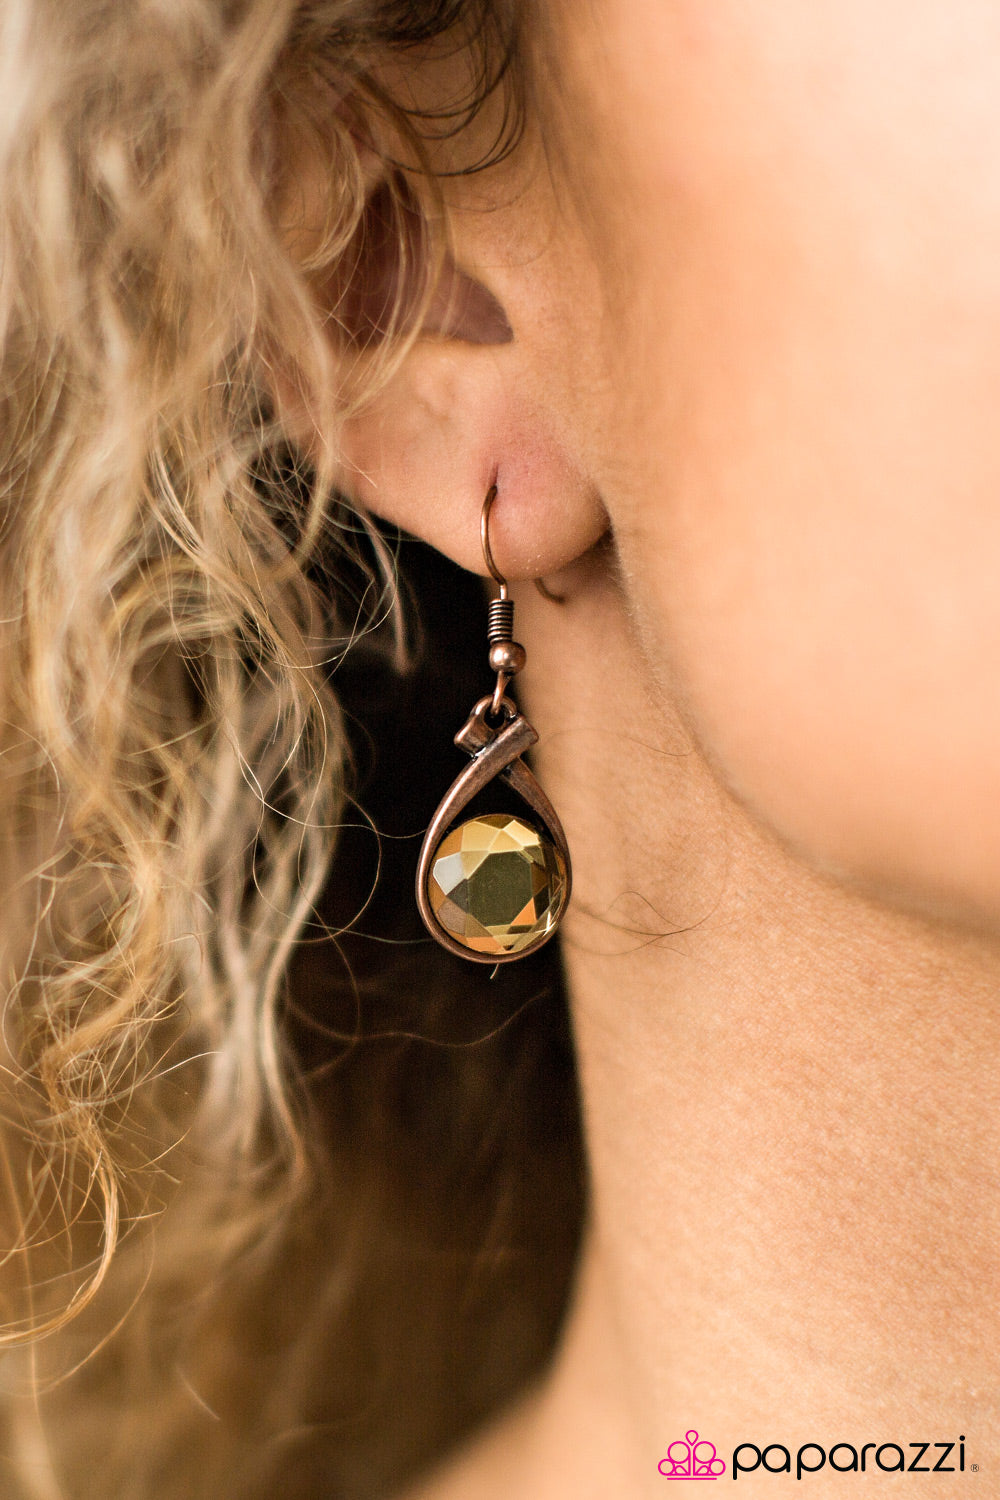 Bring On The Shimmer - Copper - Paparazzi earrings